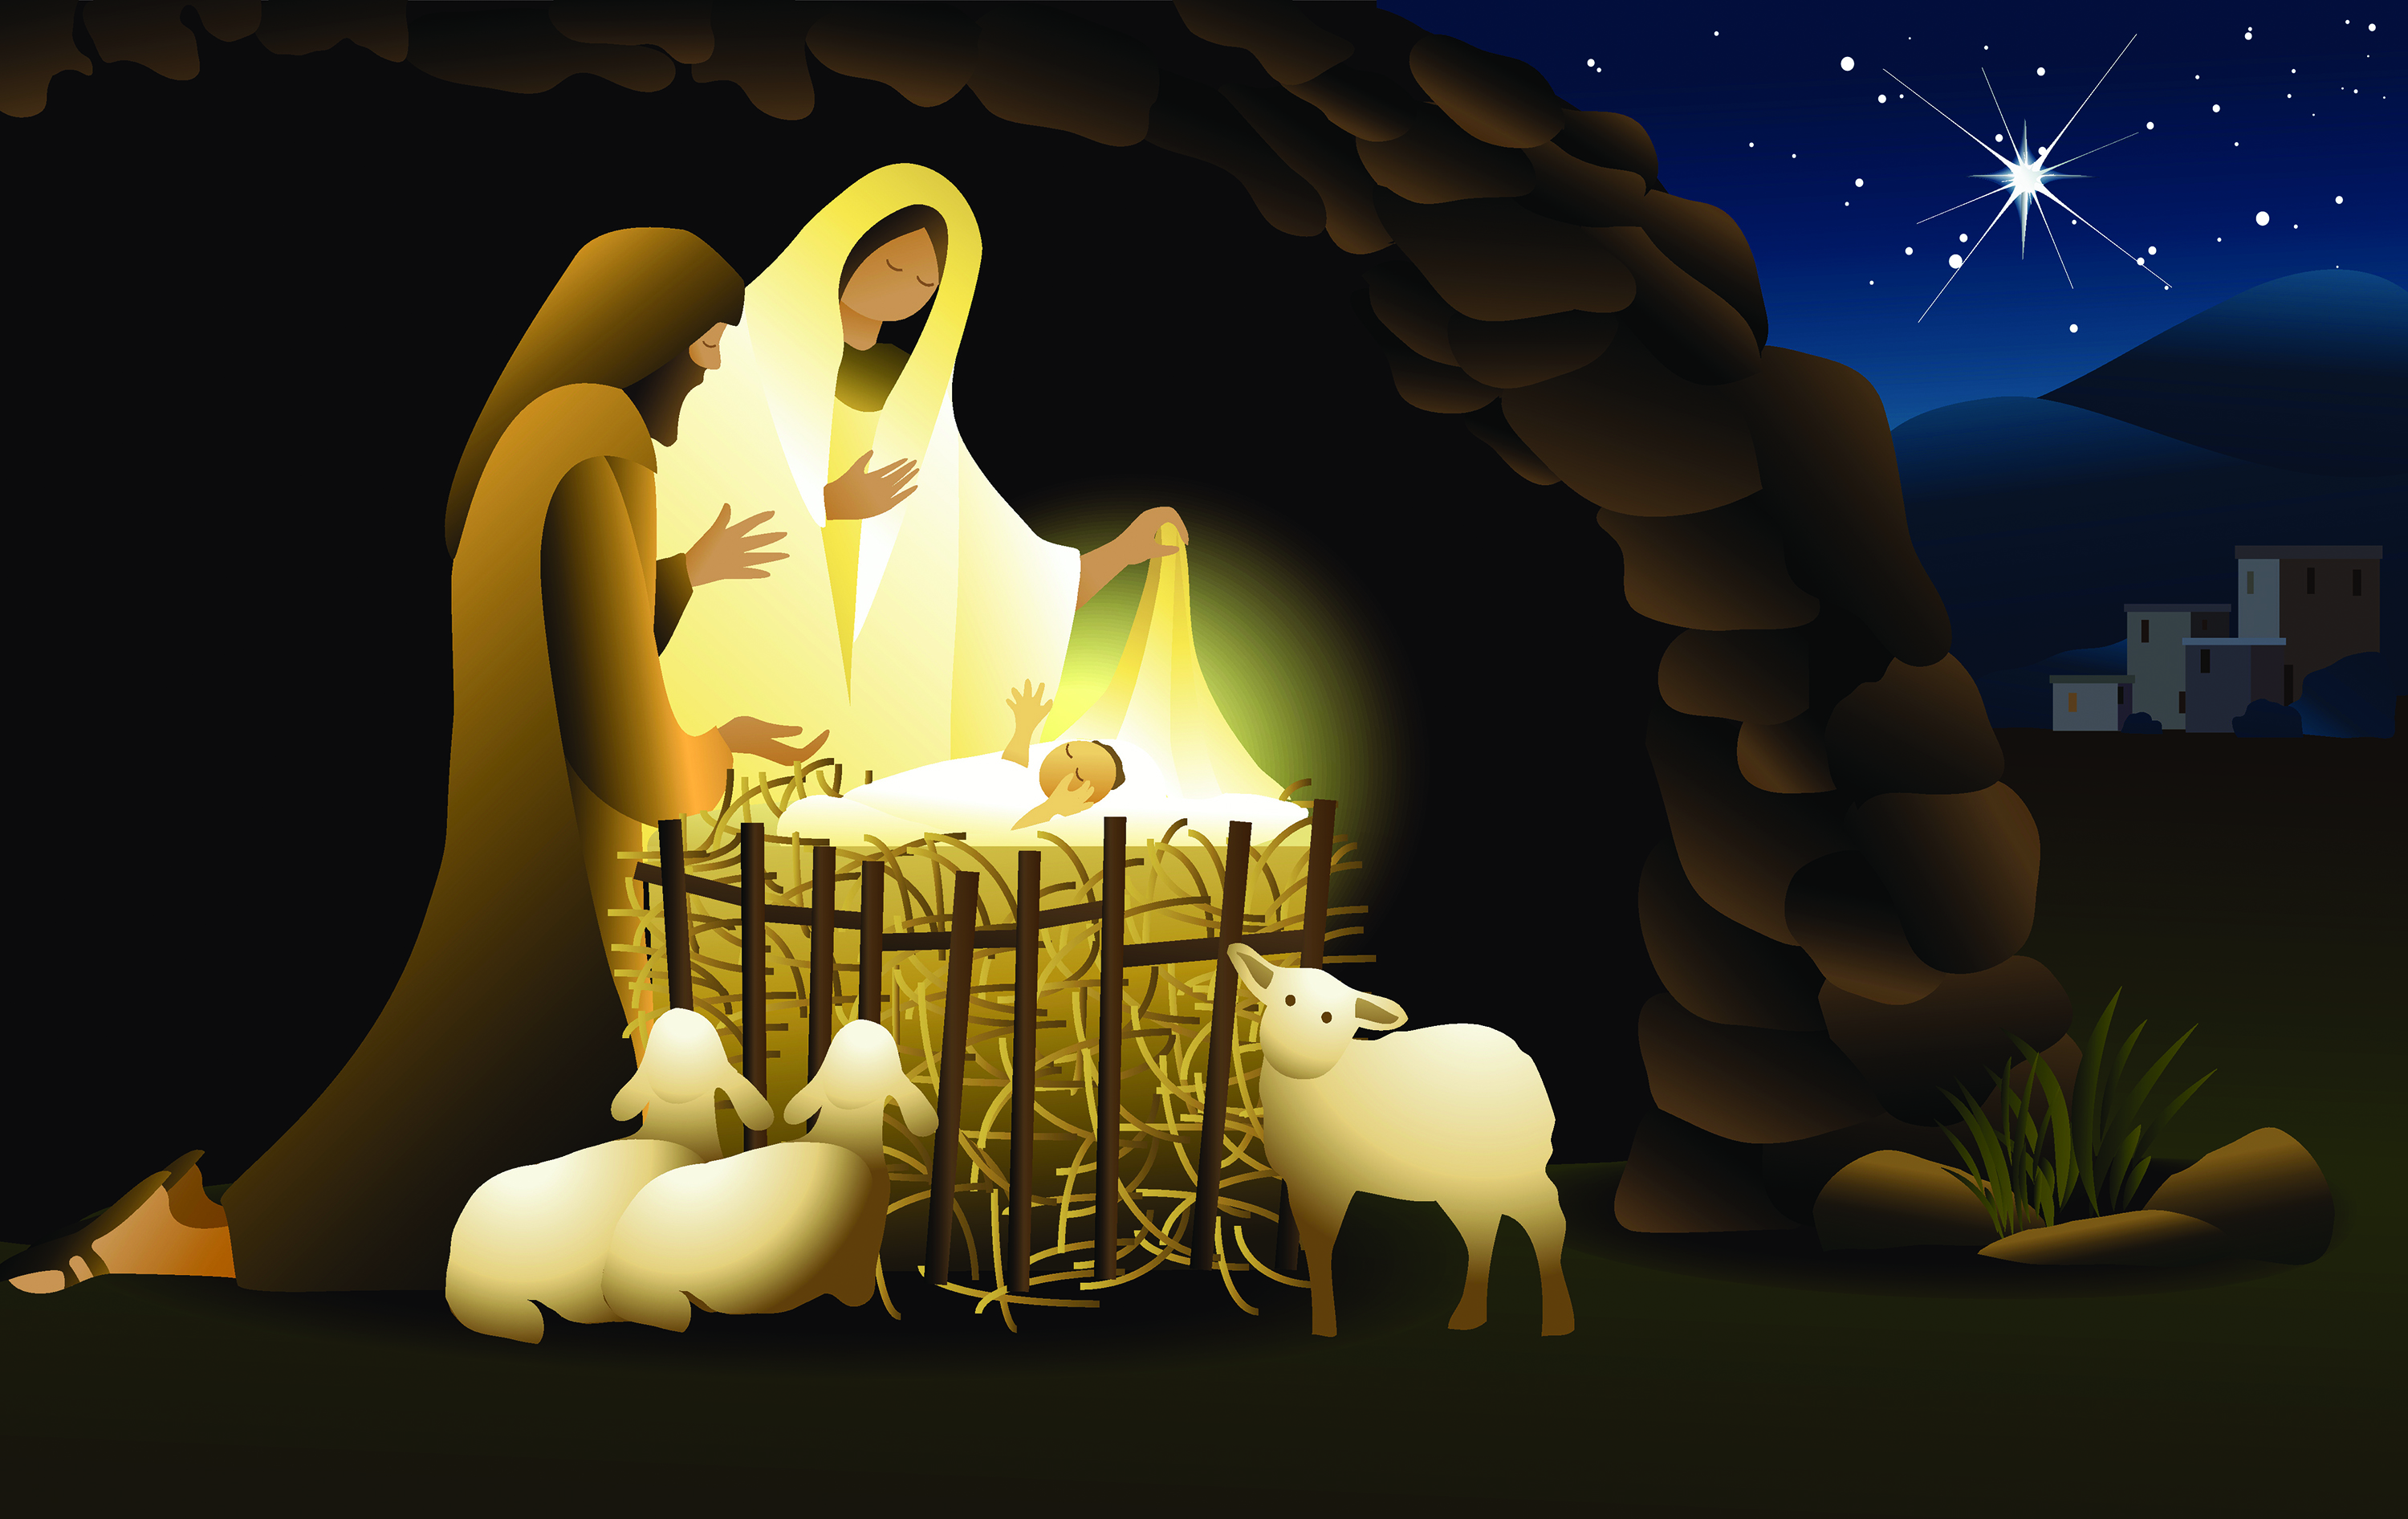 The Healing Power of Christmas